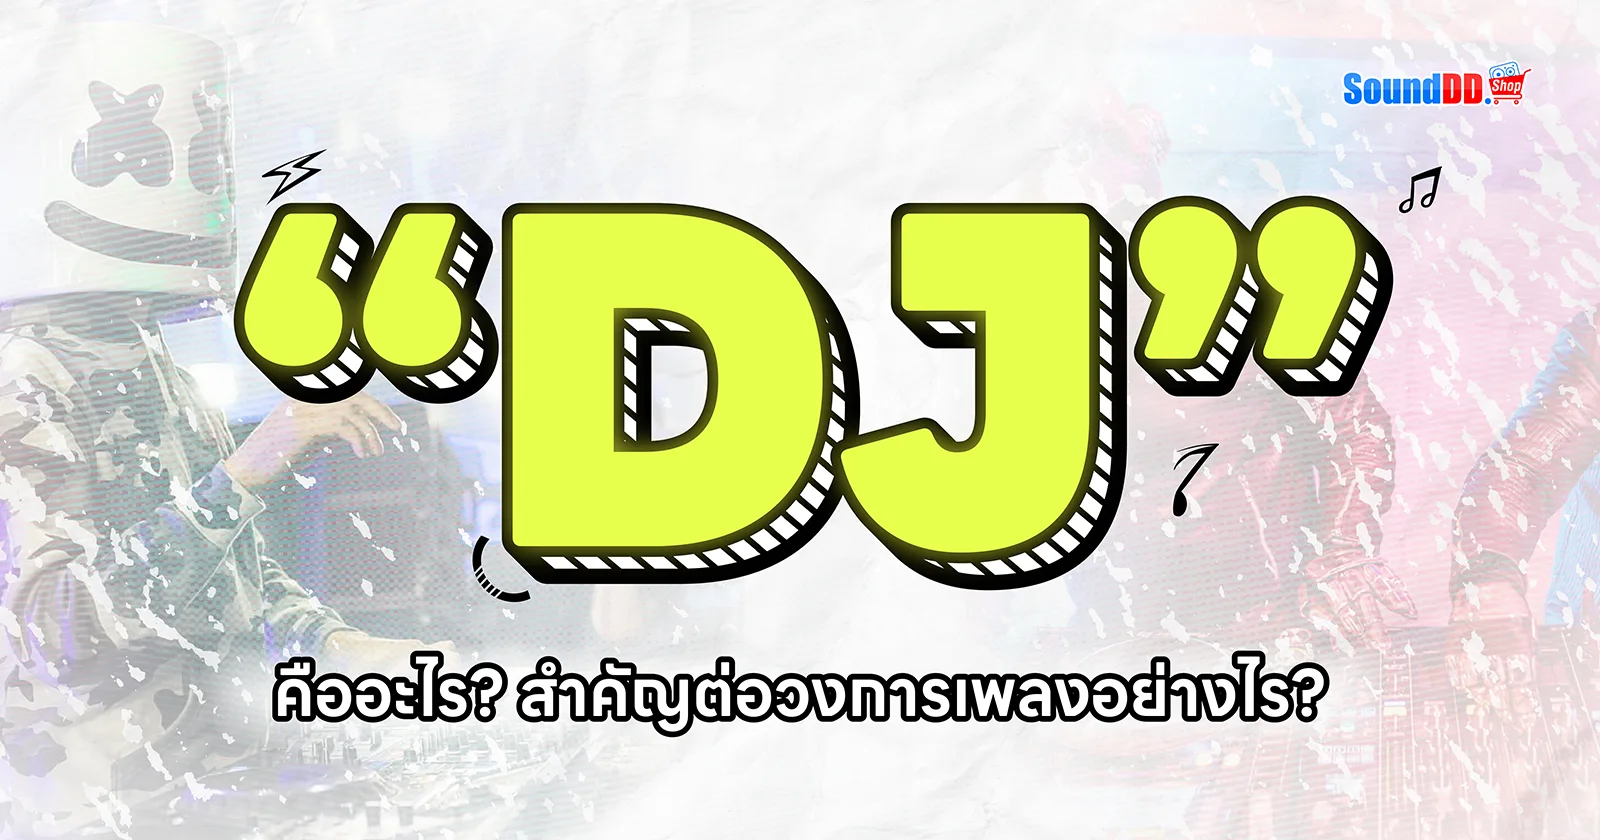 What is DJ